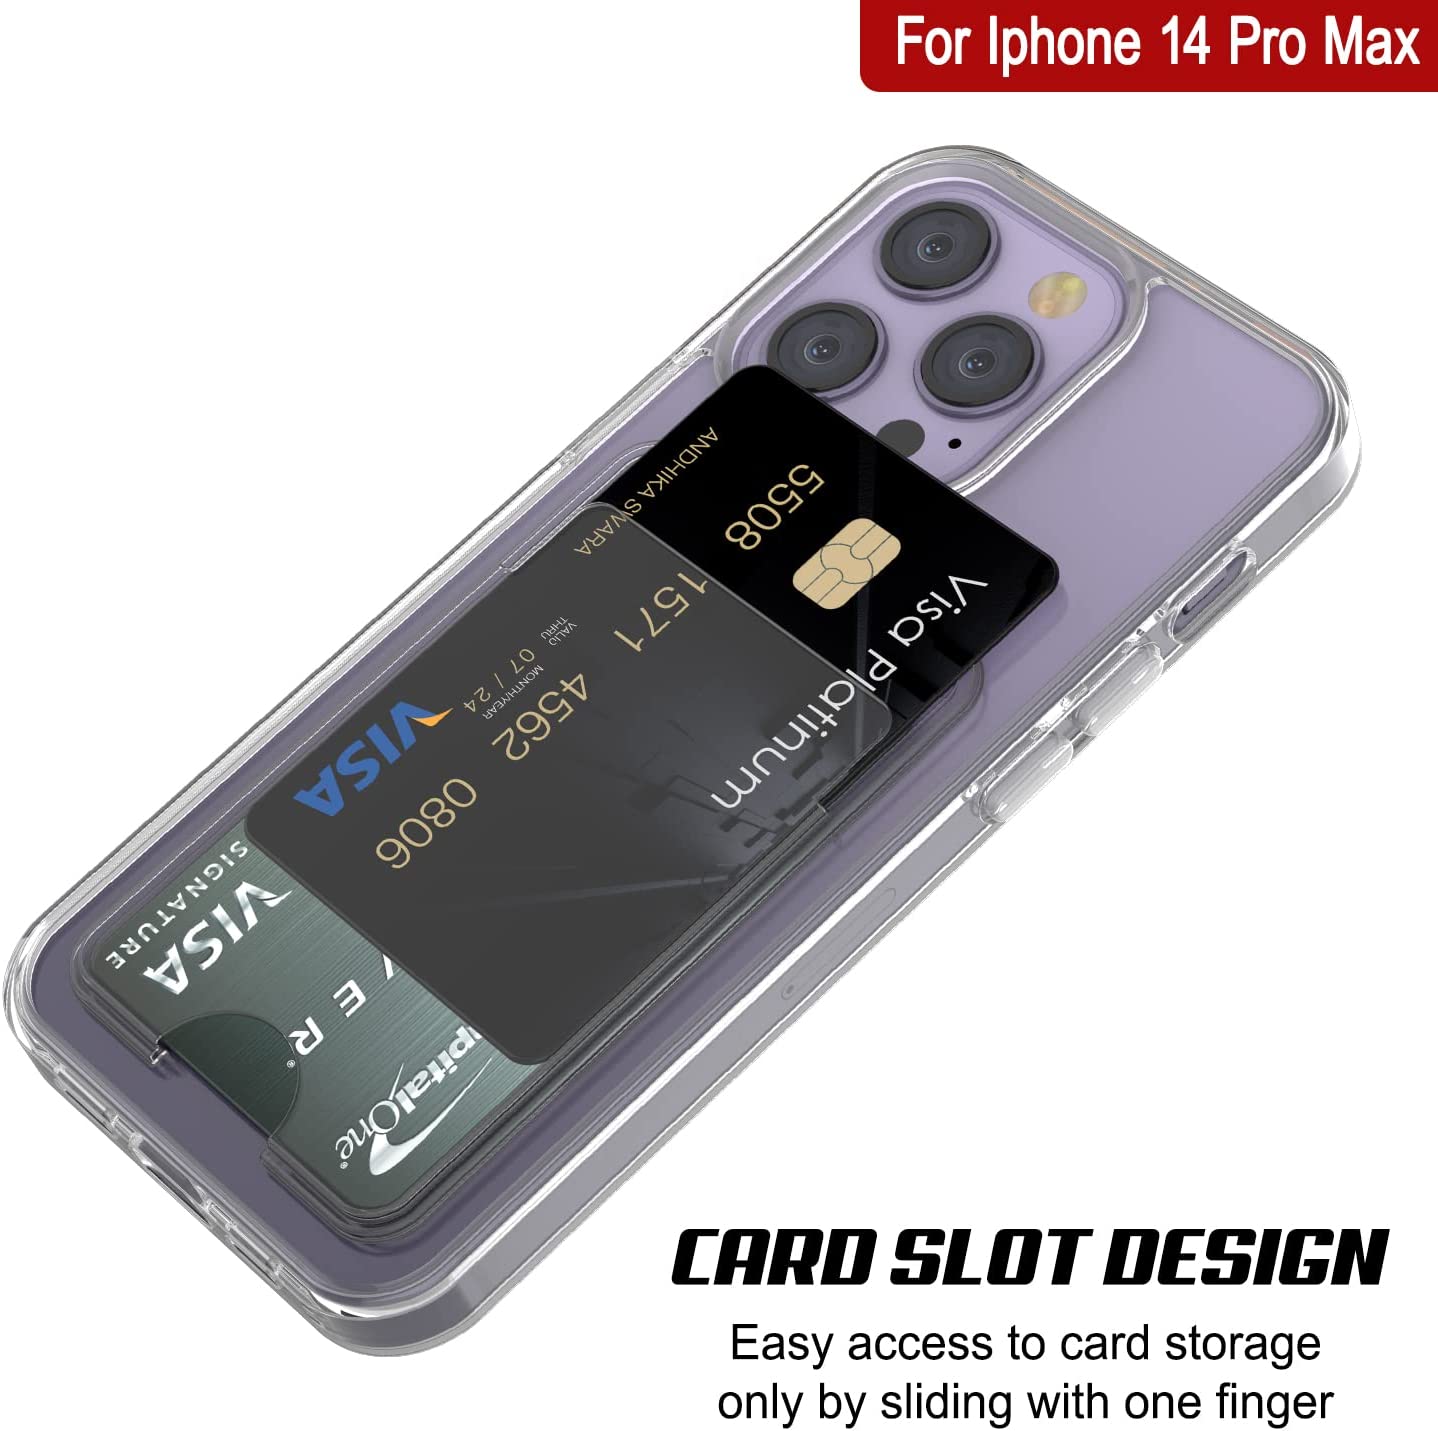 Slim case with card slot for iPhone 14 Pro Max/13 Pro Max